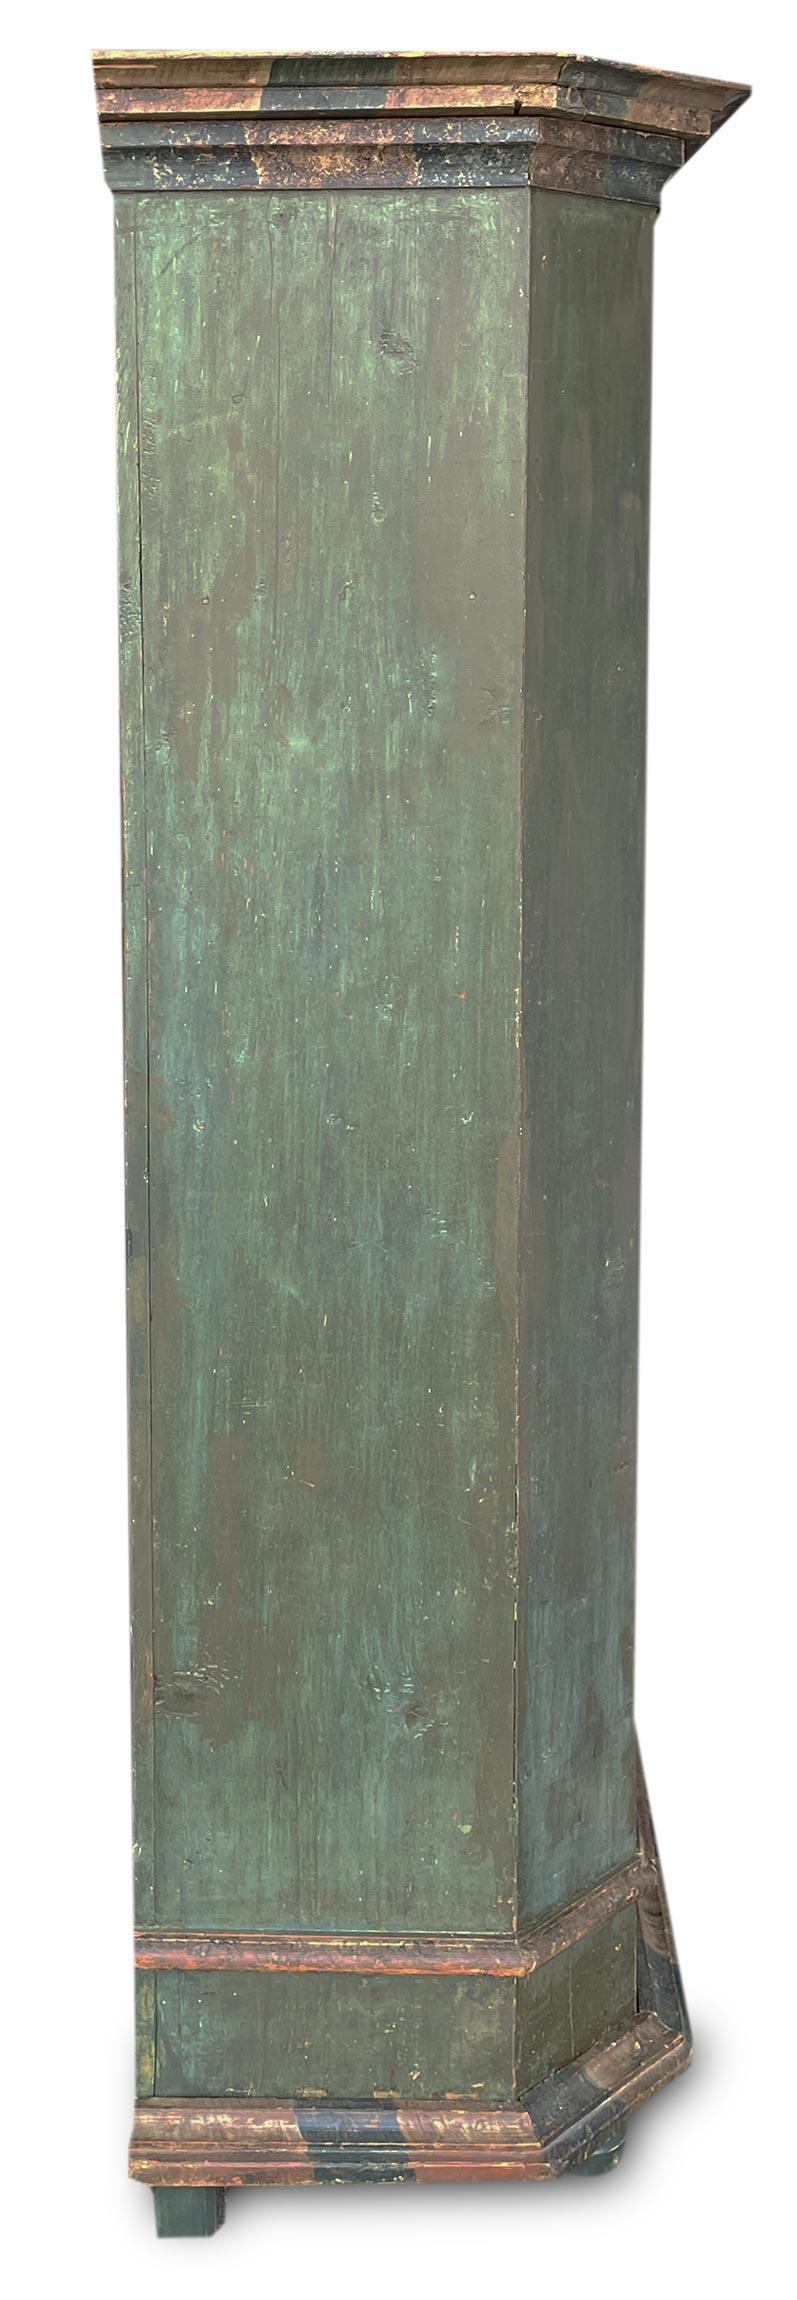 Antique Tyrolean wardrobe

Period: 1790 approximately
Origin: Tyrol (Northern Italy)
Essence: Abete
	
Measures:
Height: 201cm
Width: 145 cm (161 cm alle cornici)
Depth: 49 cm (59 cm alle cornici)

Tyrolean wardrobe painted in petrol green, with